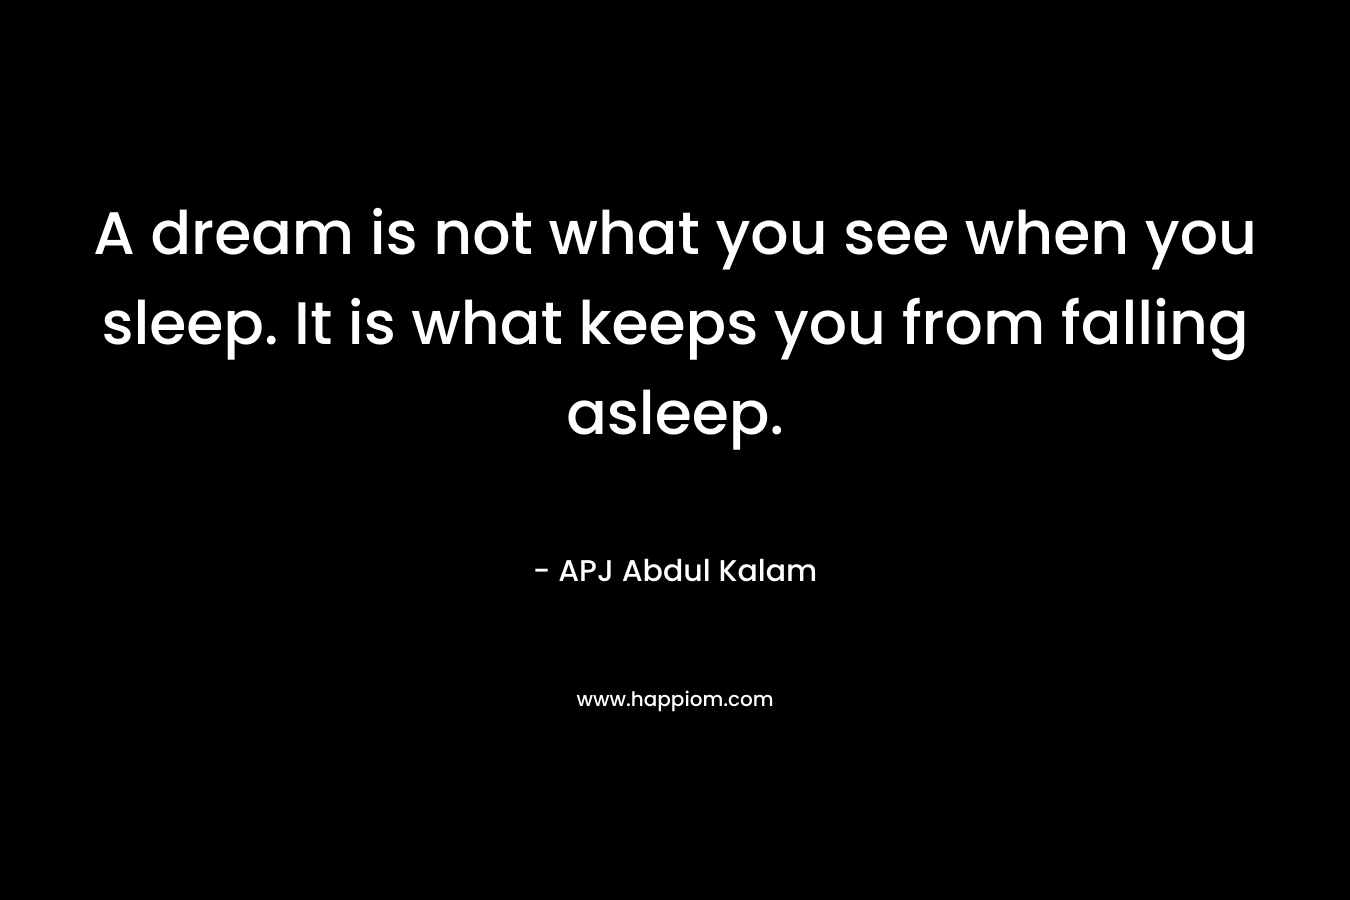 A dream is not what you see when you sleep. It is what keeps you from falling asleep.